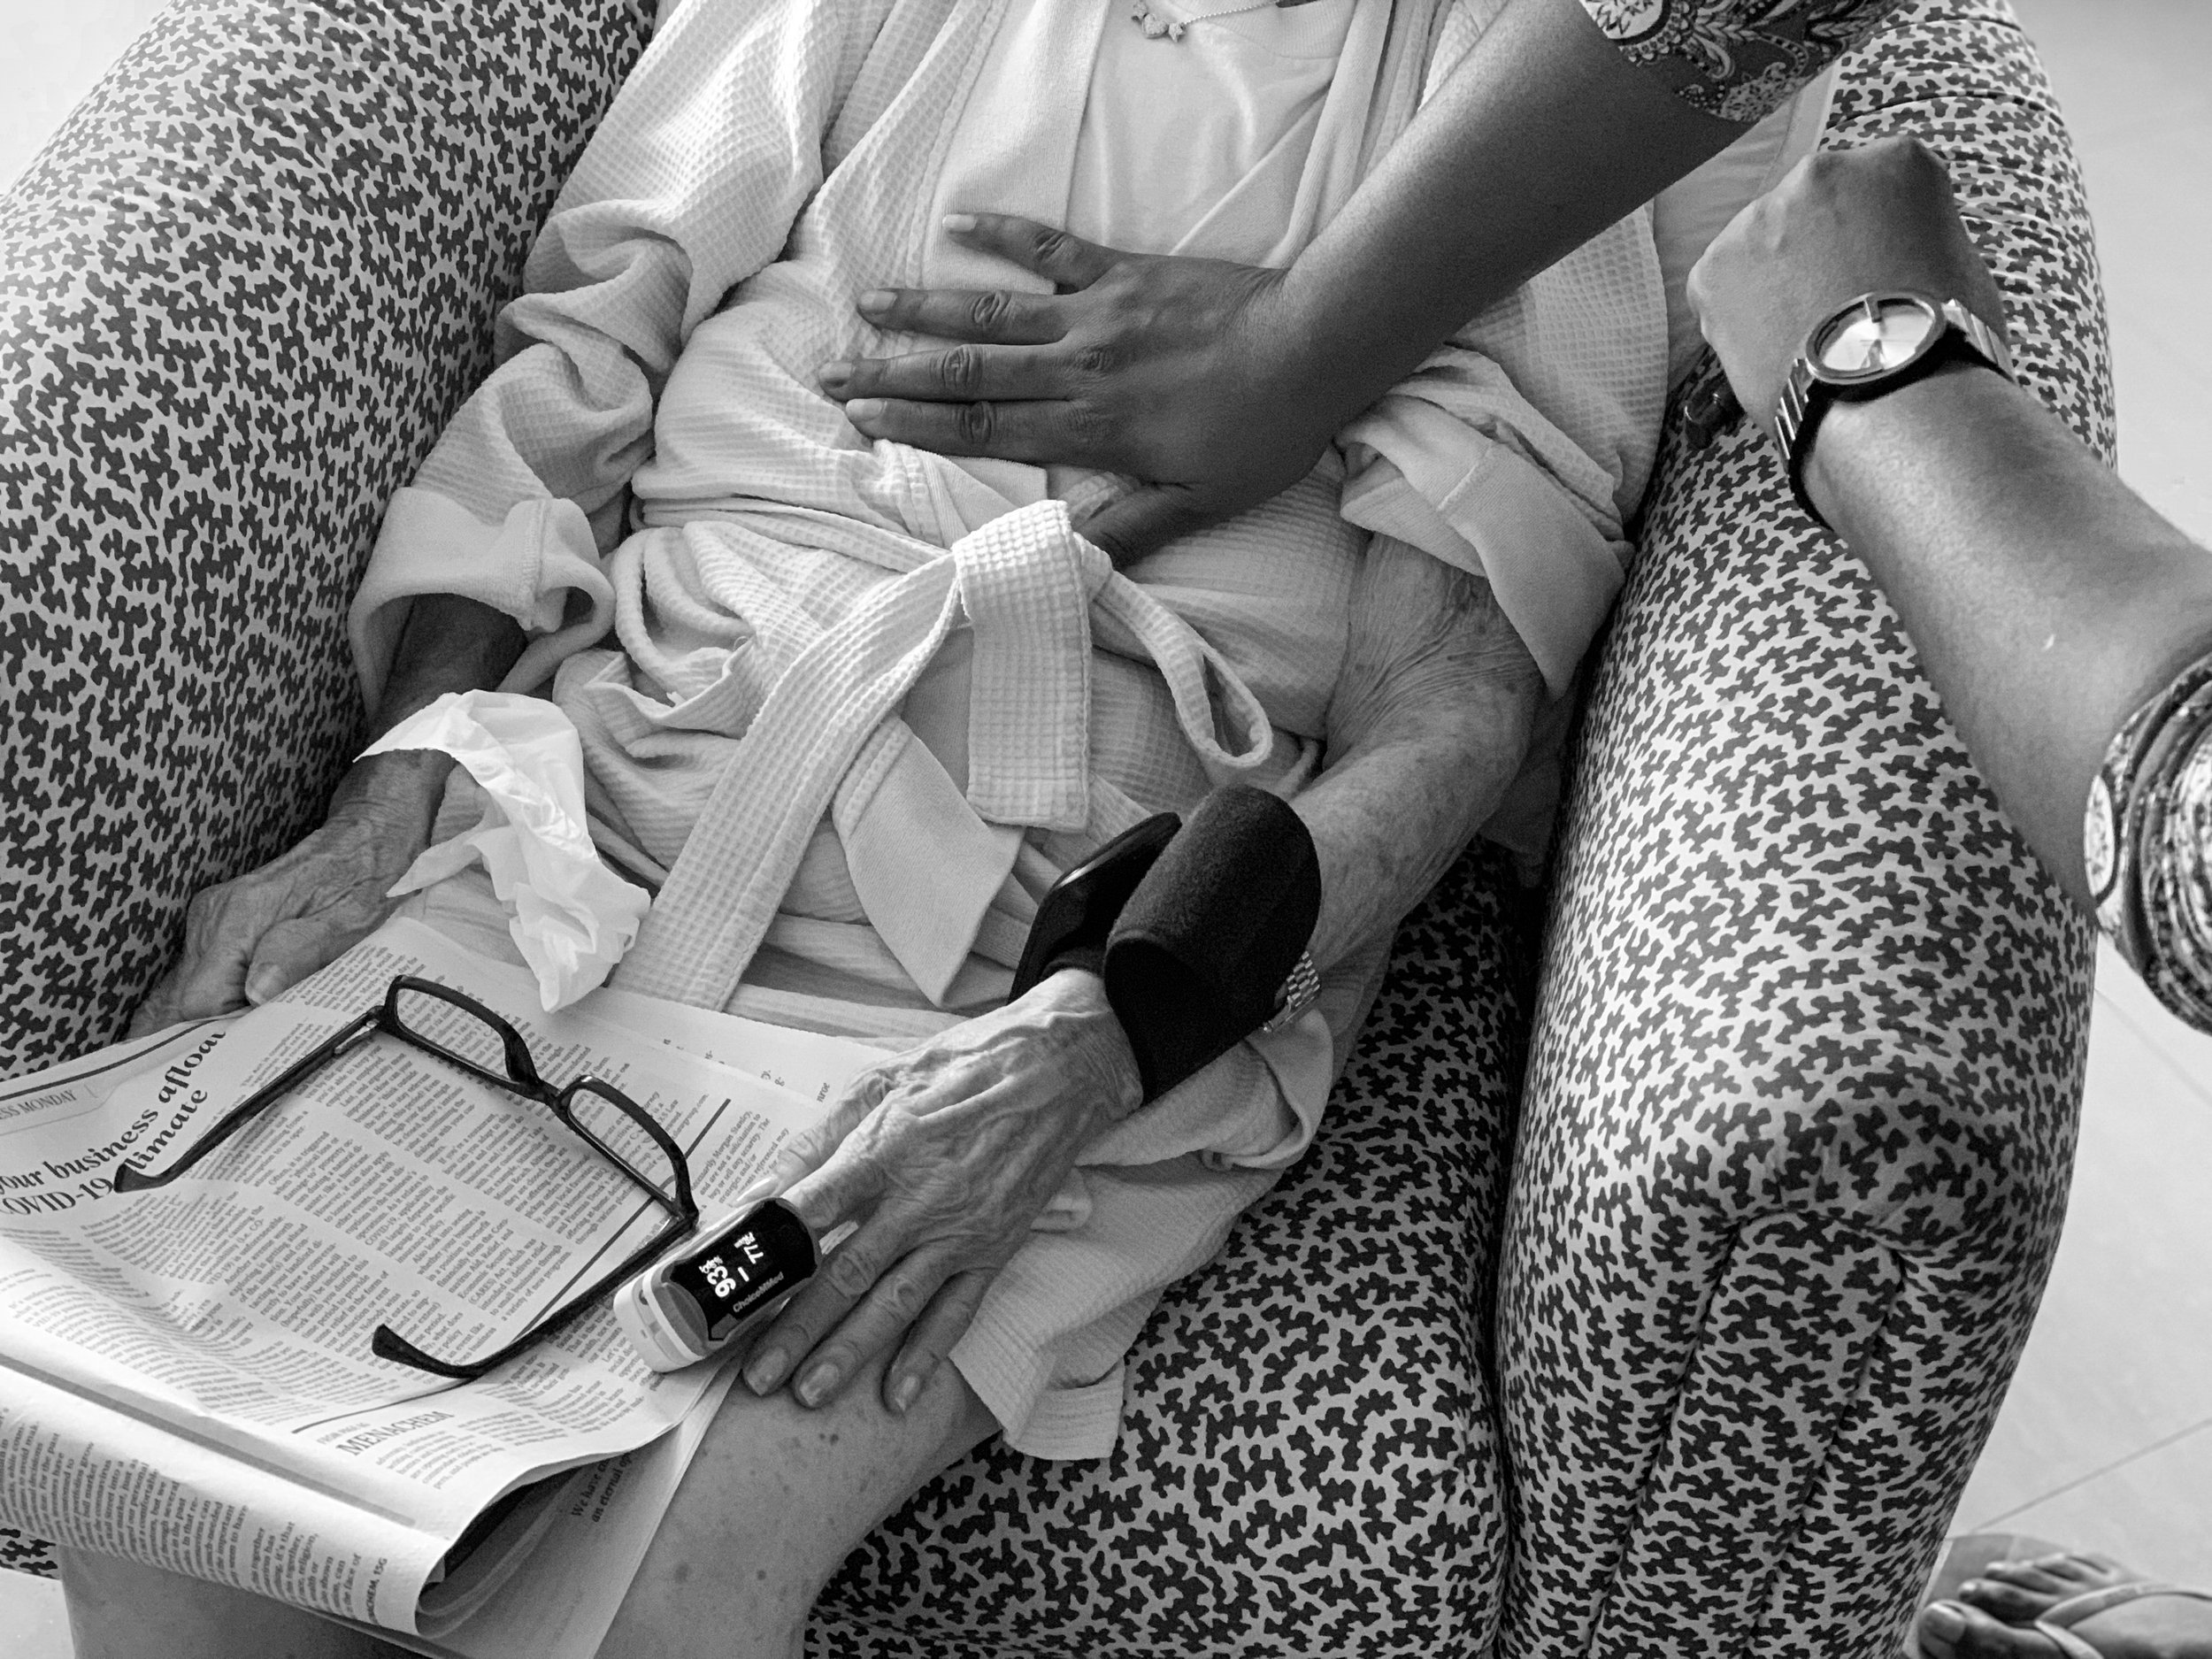  As her cancer diagnoses was being made, Sherika, Audrey's home health care aide, checks her heart rate and blood pressure. April 13, 2020 